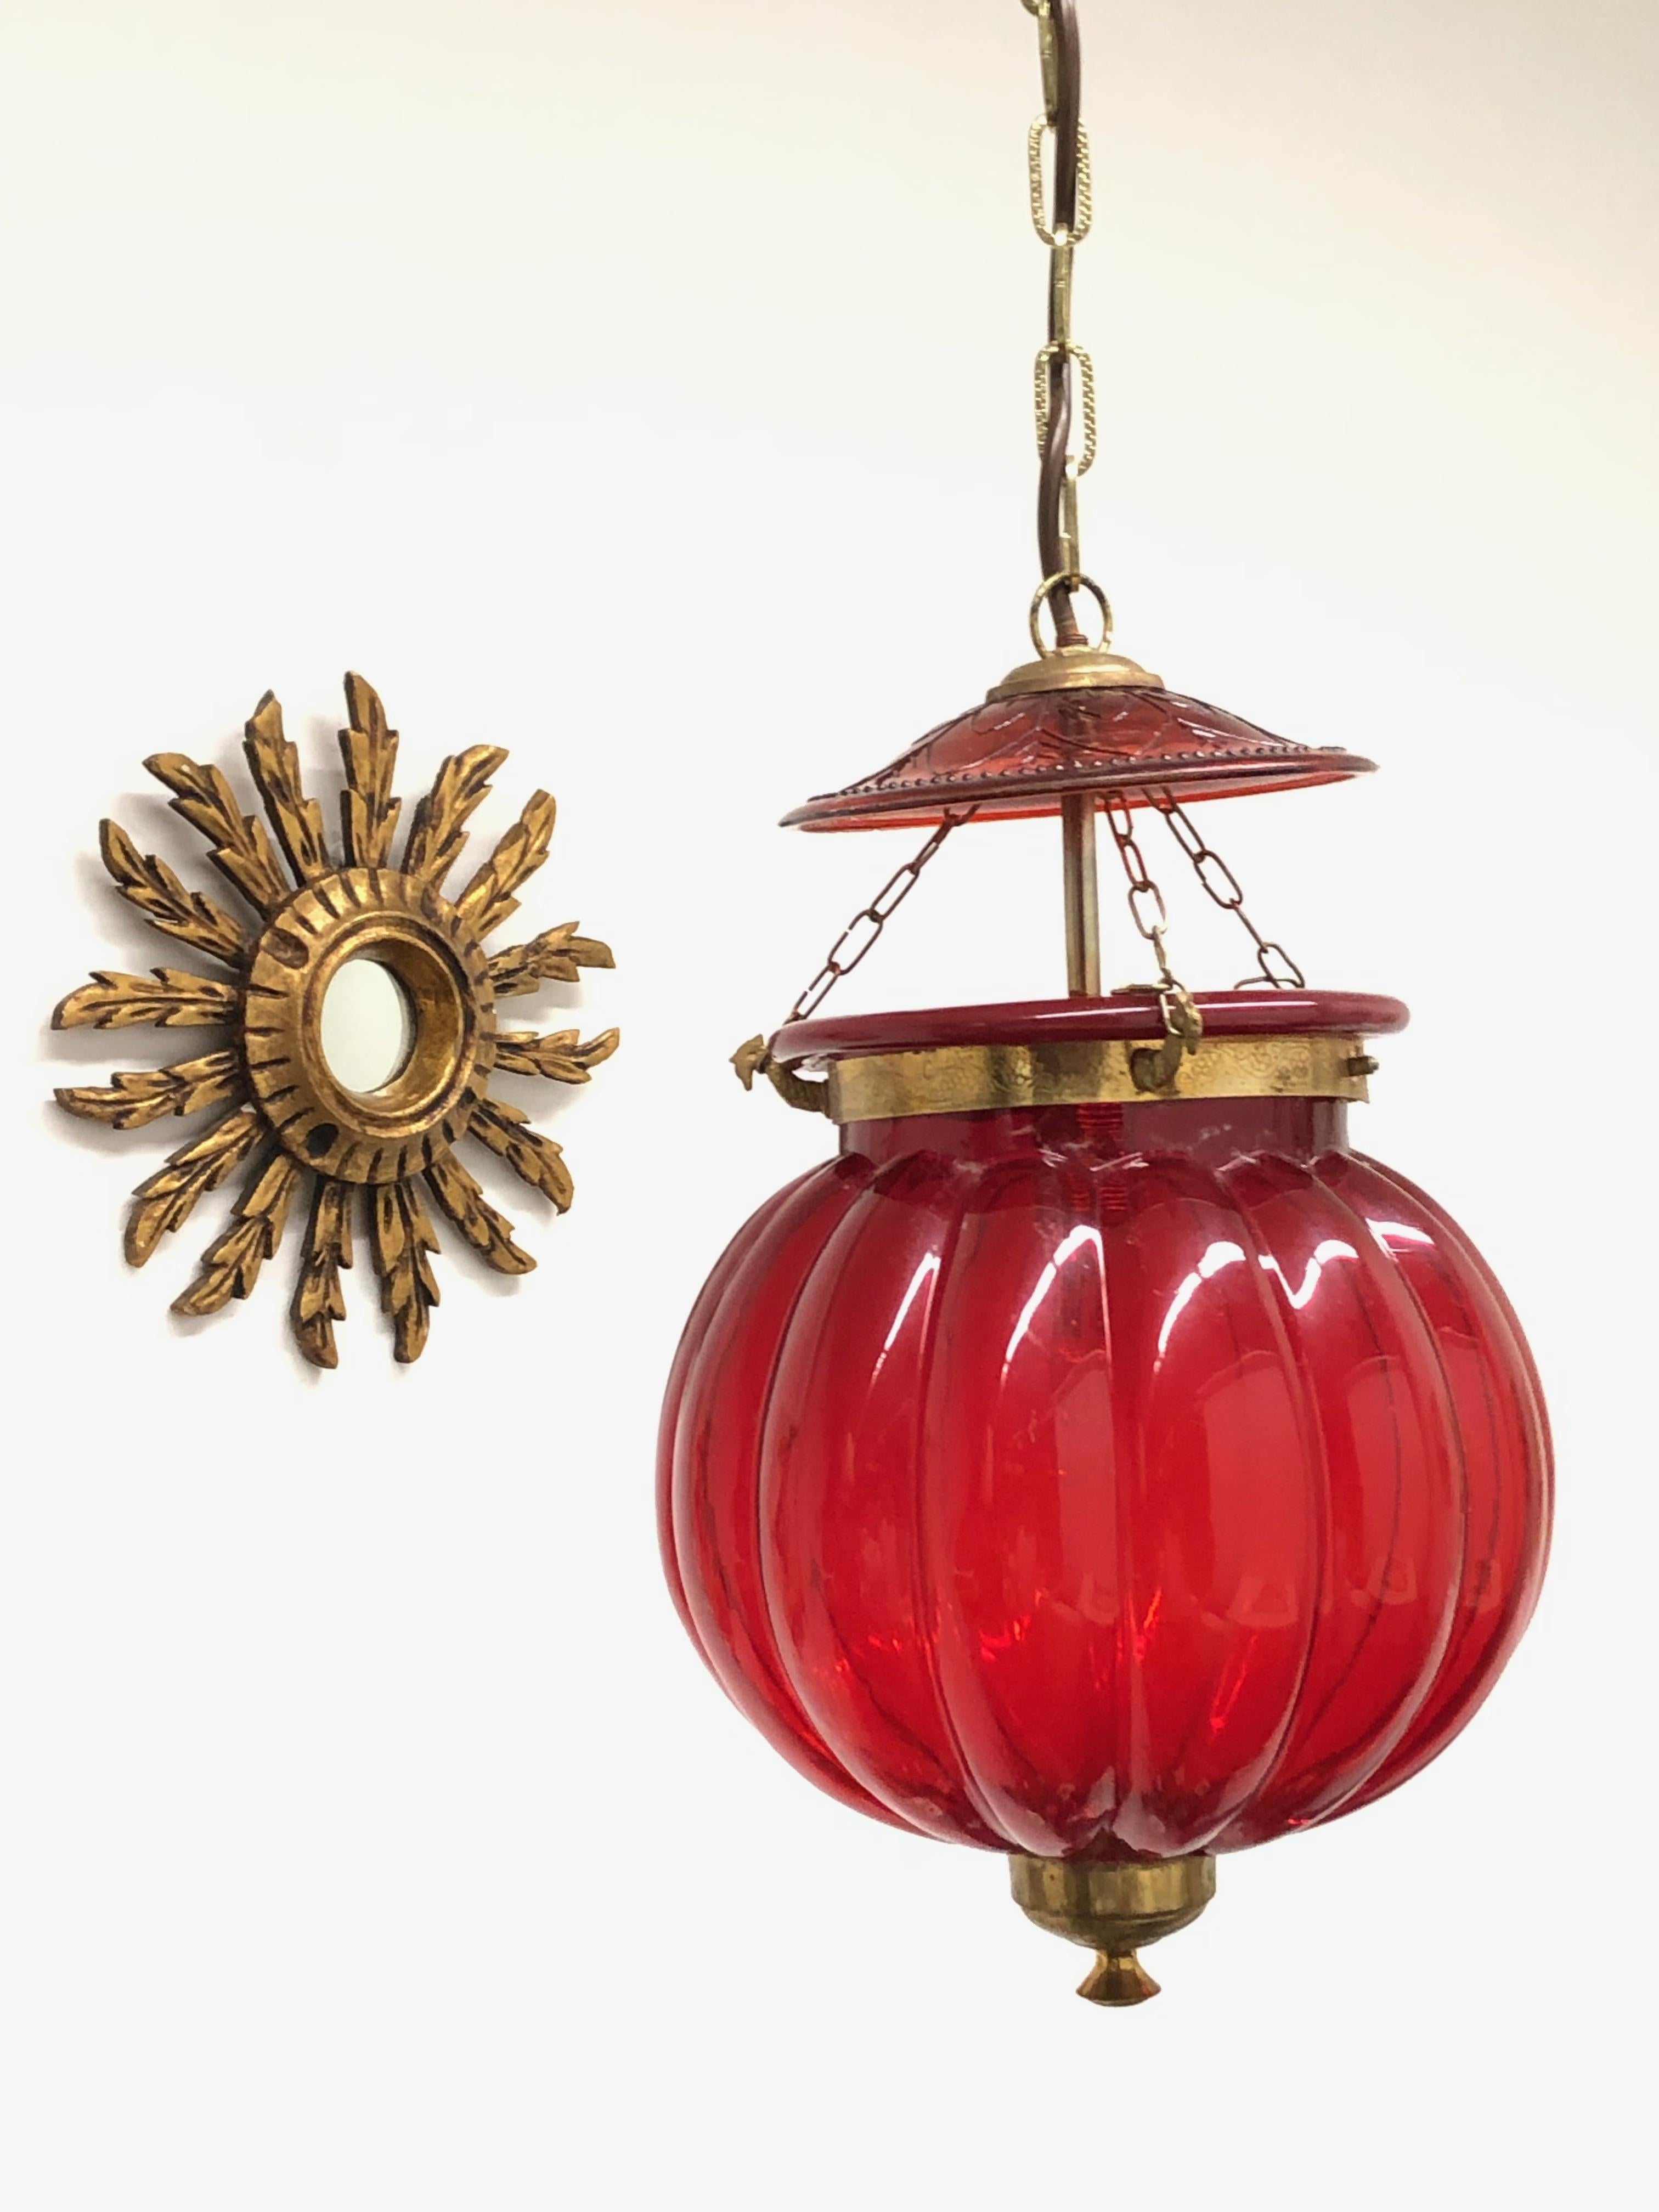 Mid-20th Century Oriental Style Red Glass and Brass Hall Lantern Pendant, German 1960s For Sale